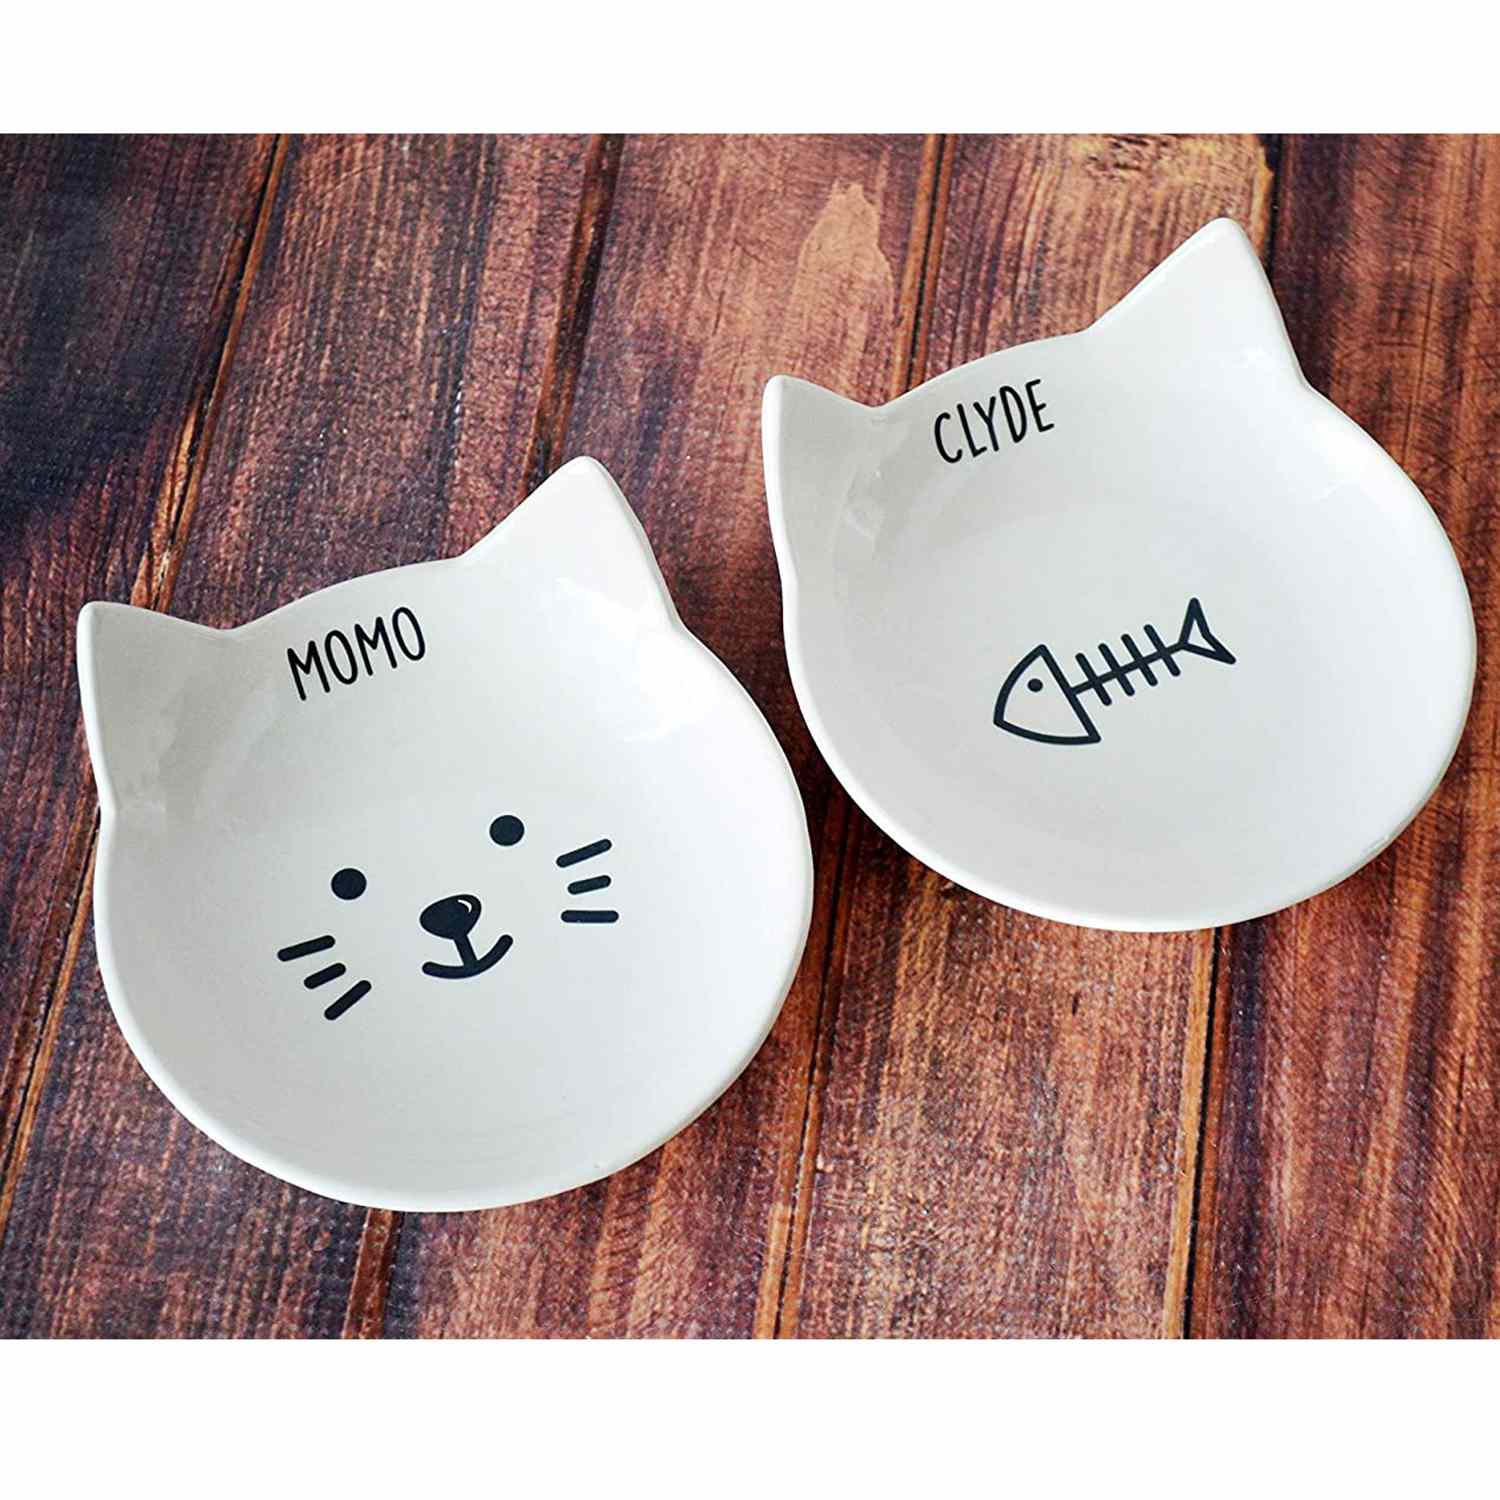 Cat Lovers Gifts